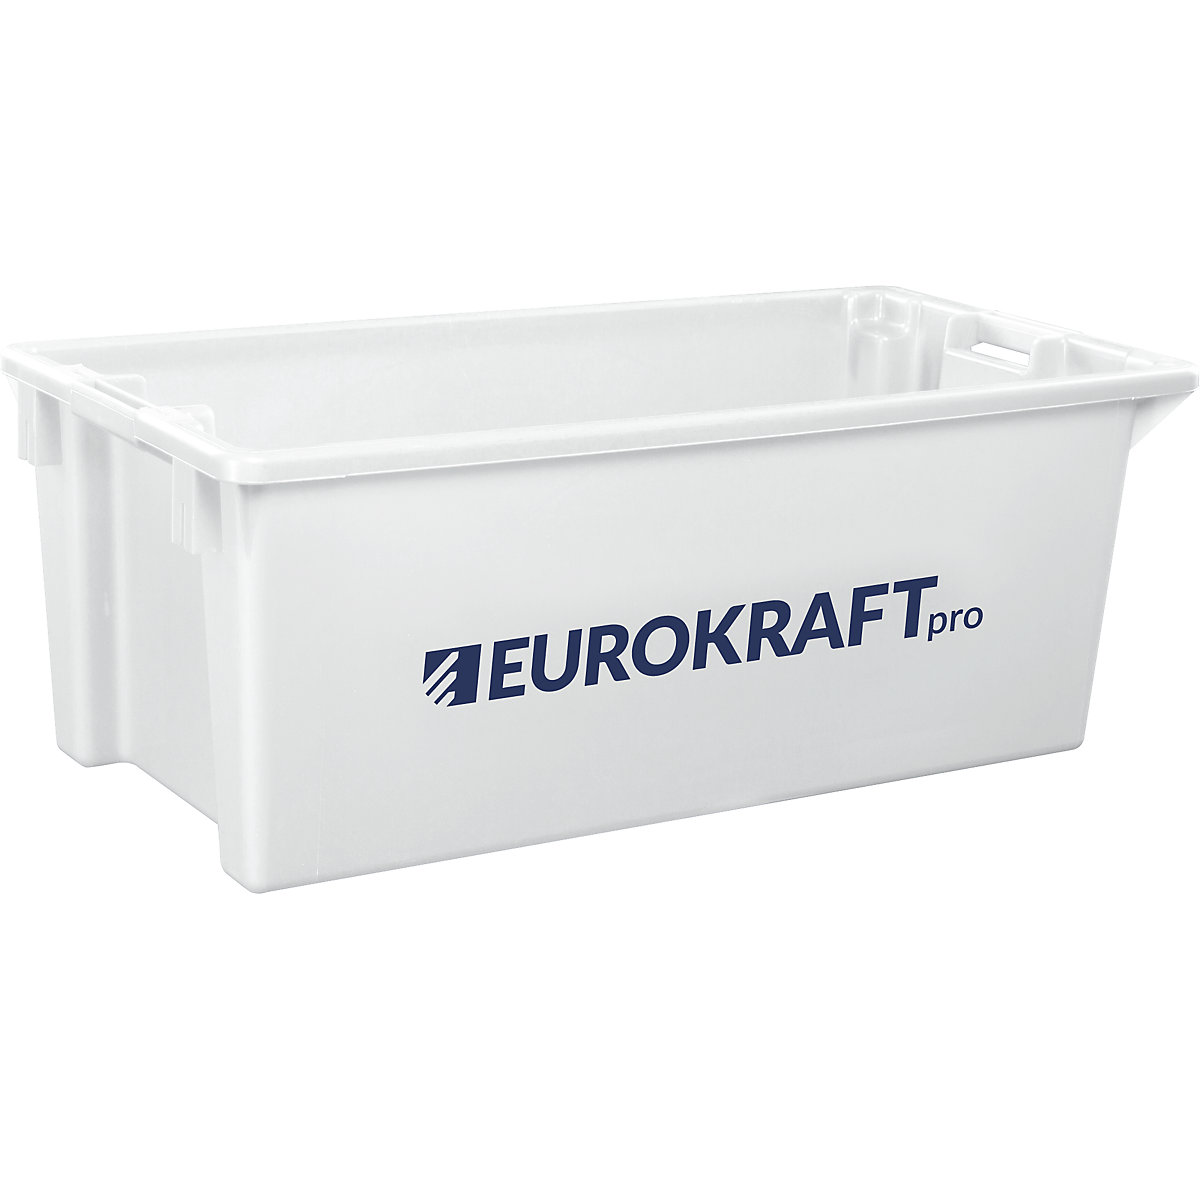 EUROKRAFTpro – Stack/nest container made of polypropylene suitable for foodstuffs, 13 l capacity, pack of 4, solid walls and base, natural colour